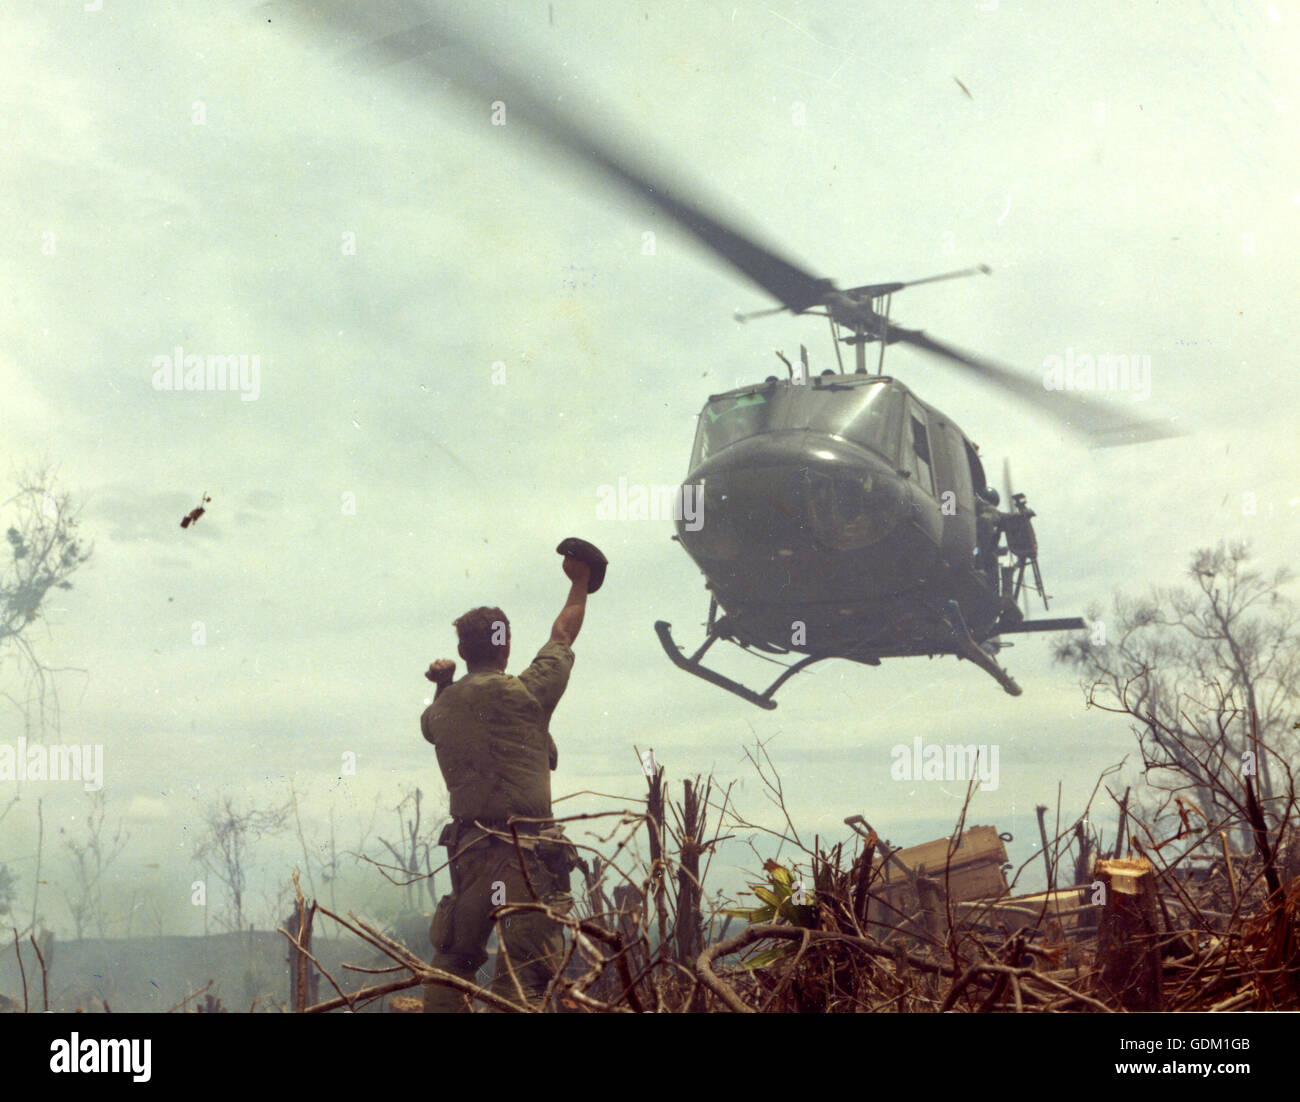 Operation Jeb Stuart III, south of Quang Tri. Soldier guiding a Huey helicopter into landing. 1968. Stock Photo